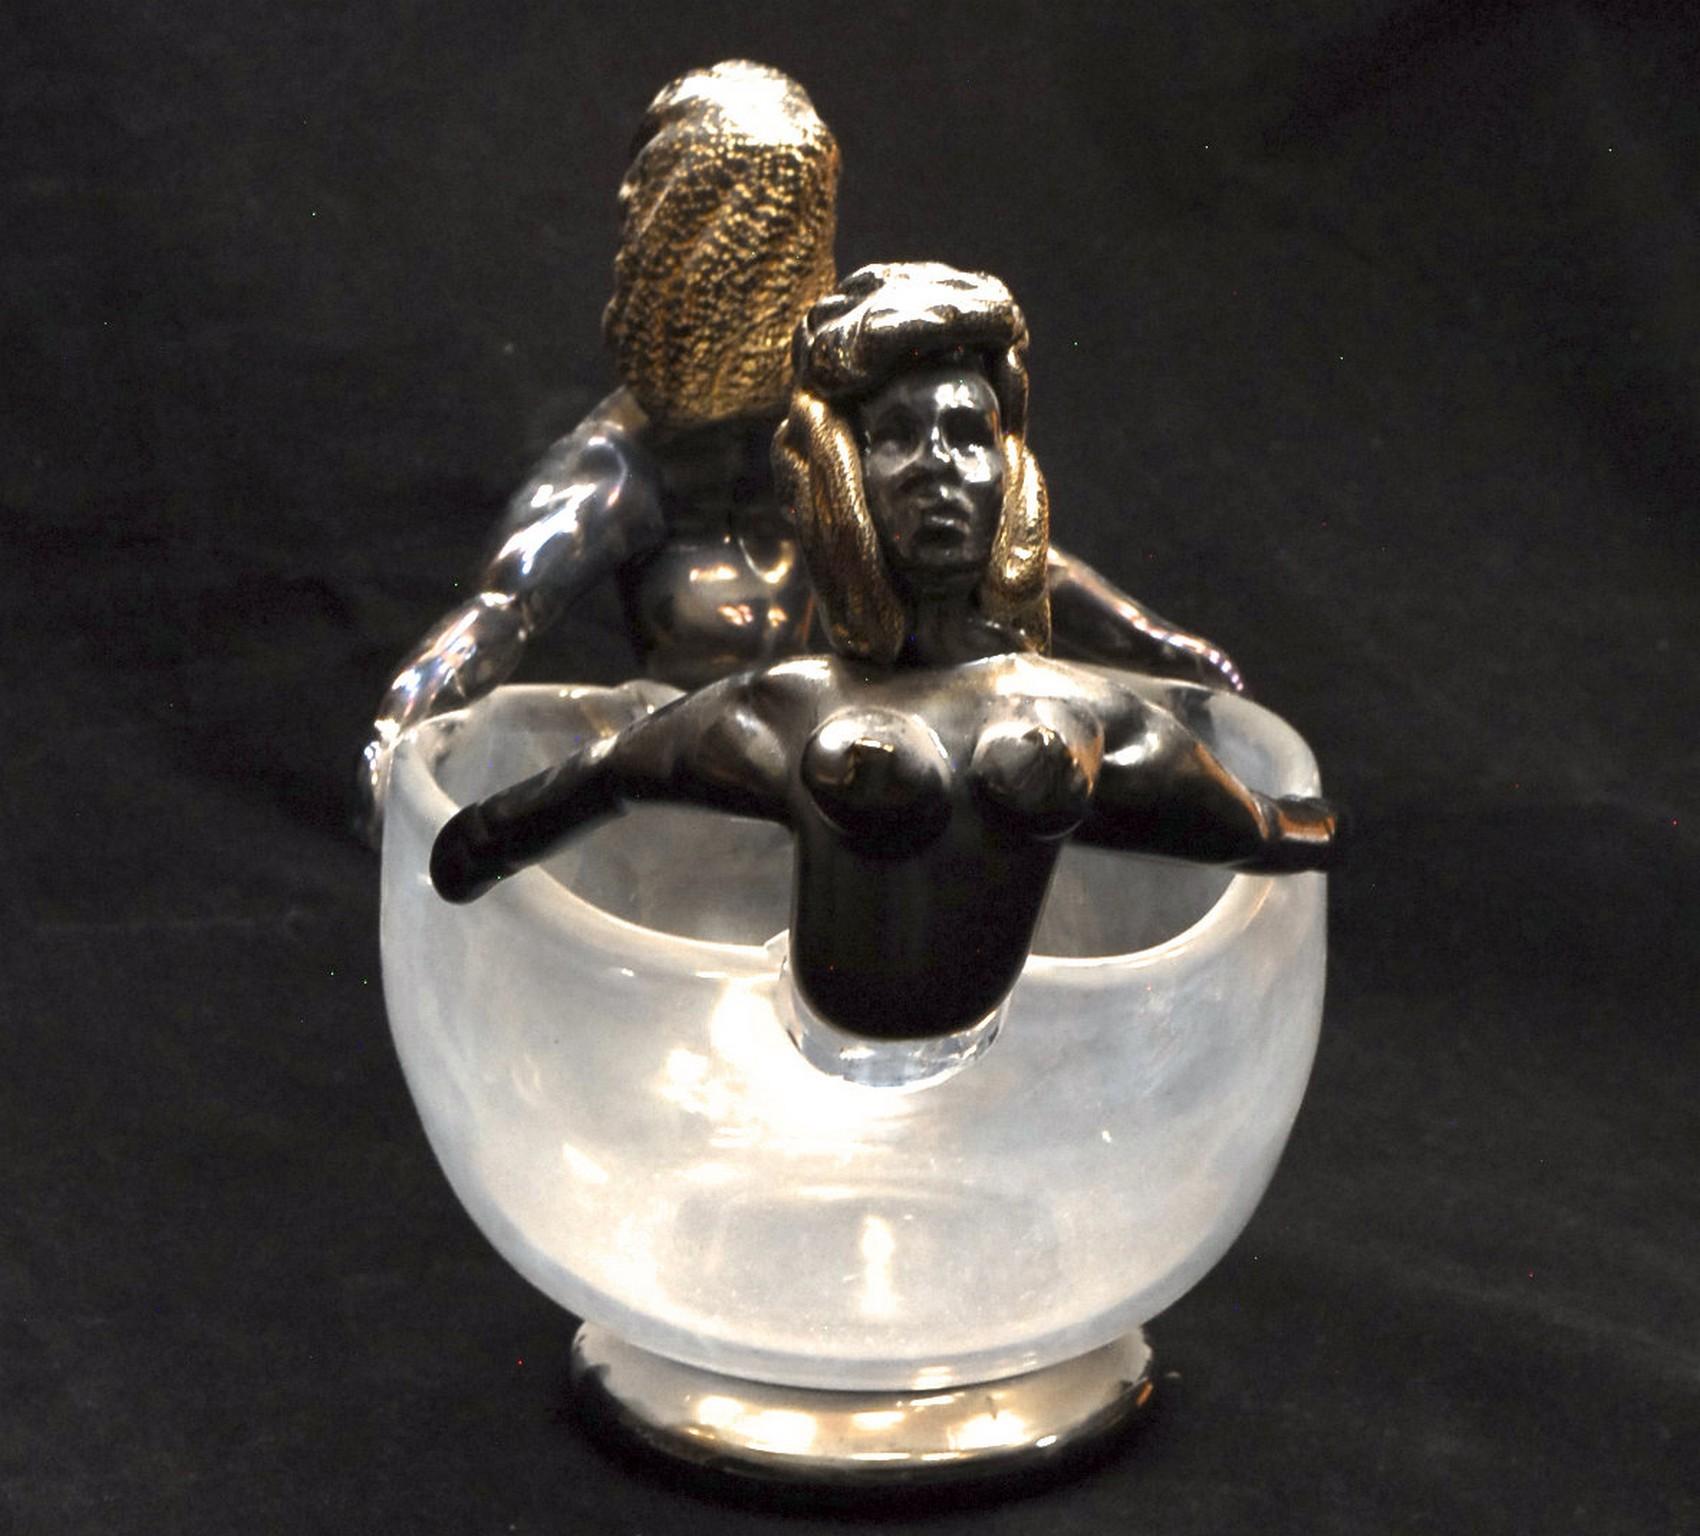 20th Century Iridescent Bowl with figurine in Figurehead Position, Ercole Barovier, 1930 For Sale